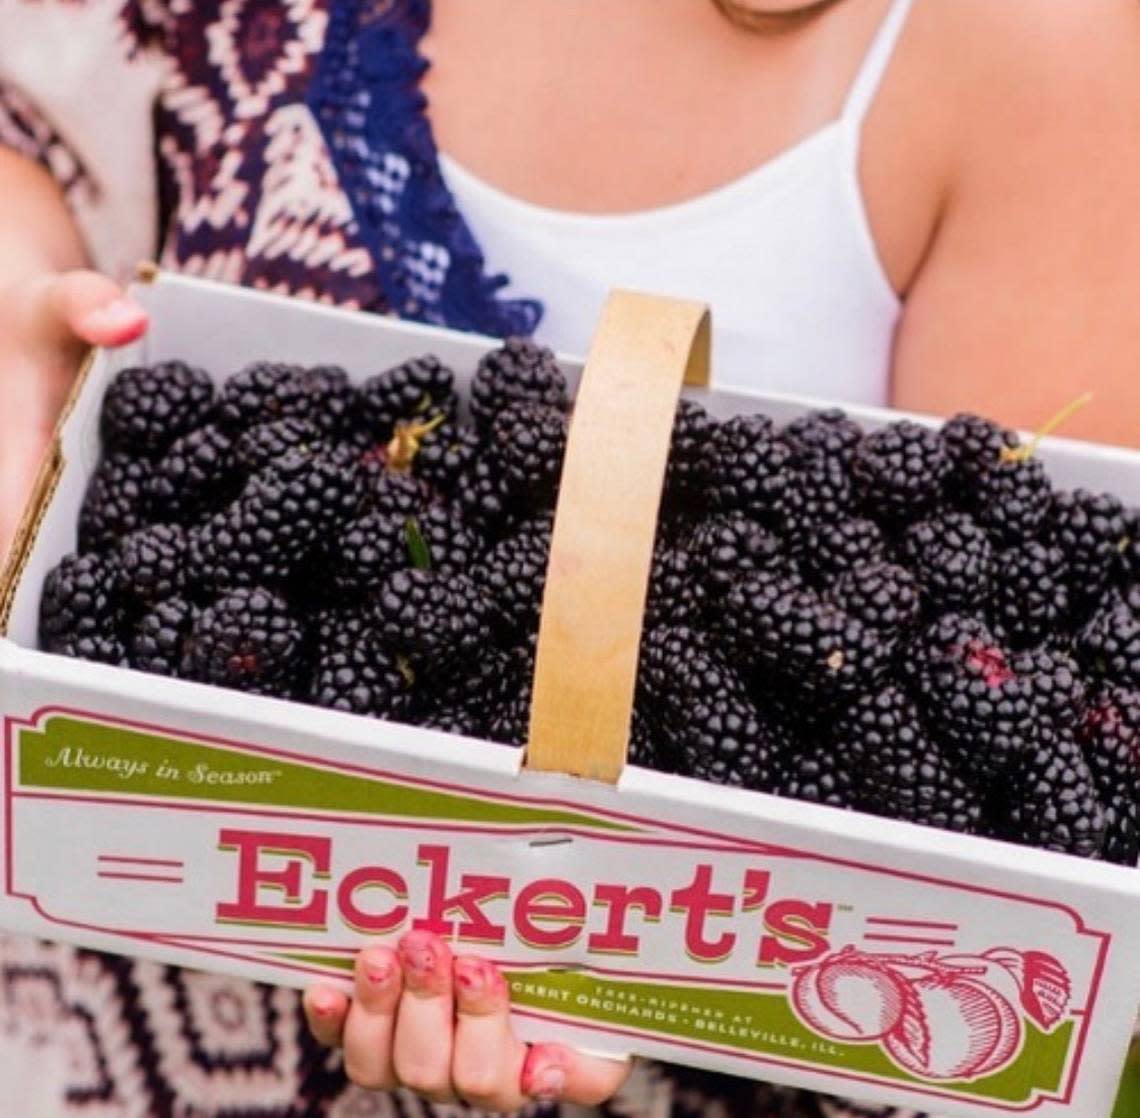 Pick-your-own blackberries is back at Eckert’s Orchard in Versailles, which will host its Blackberry Festival this weekend.